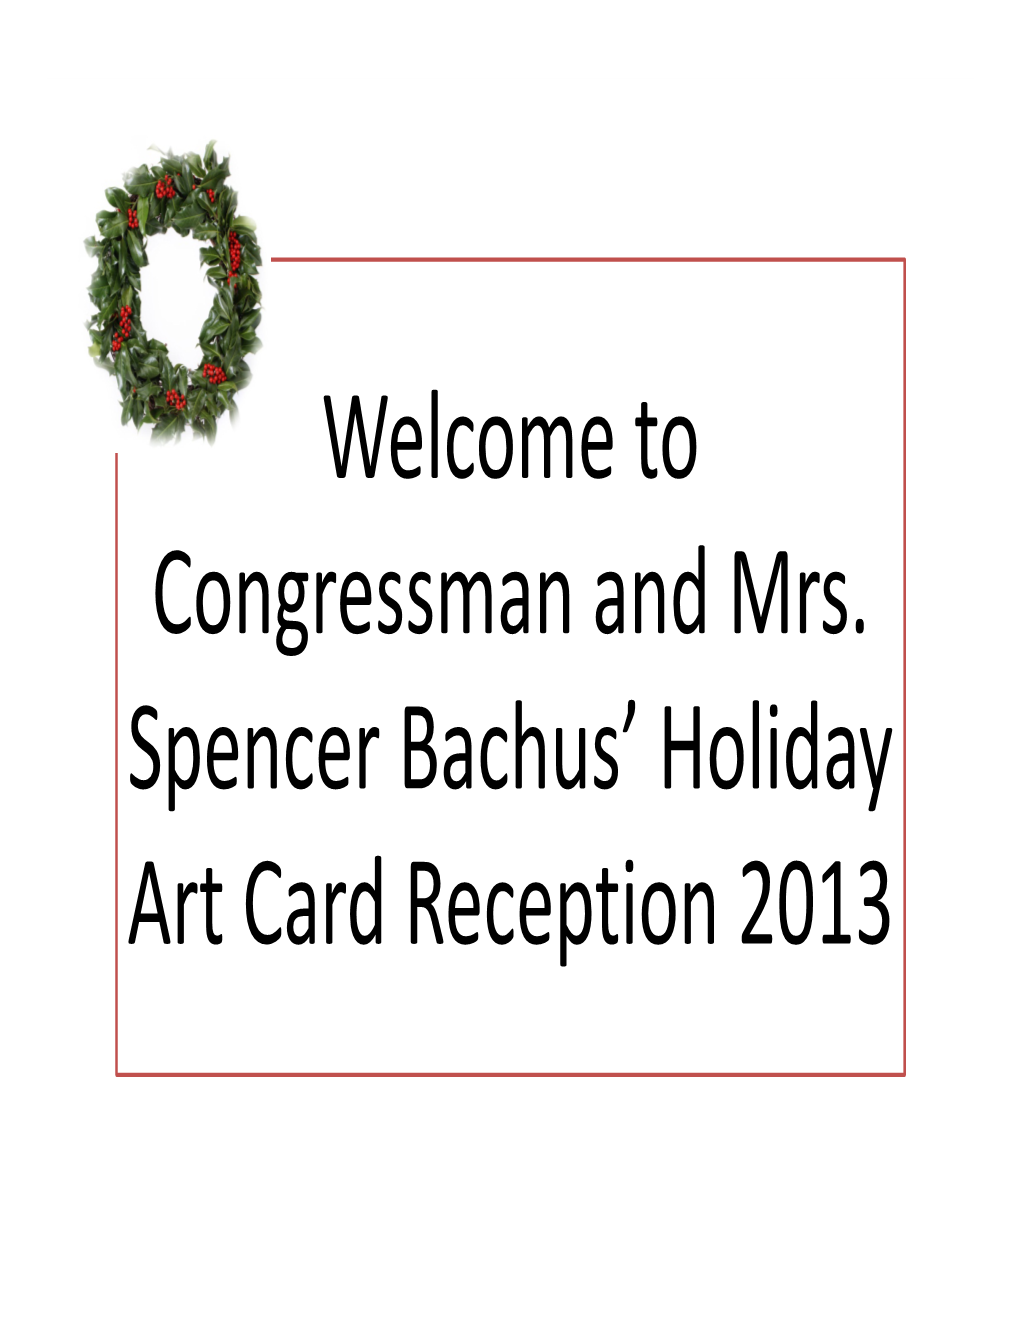 Welcome to Congressman and Mrs. Spencer Bachus' Holiday Art Card